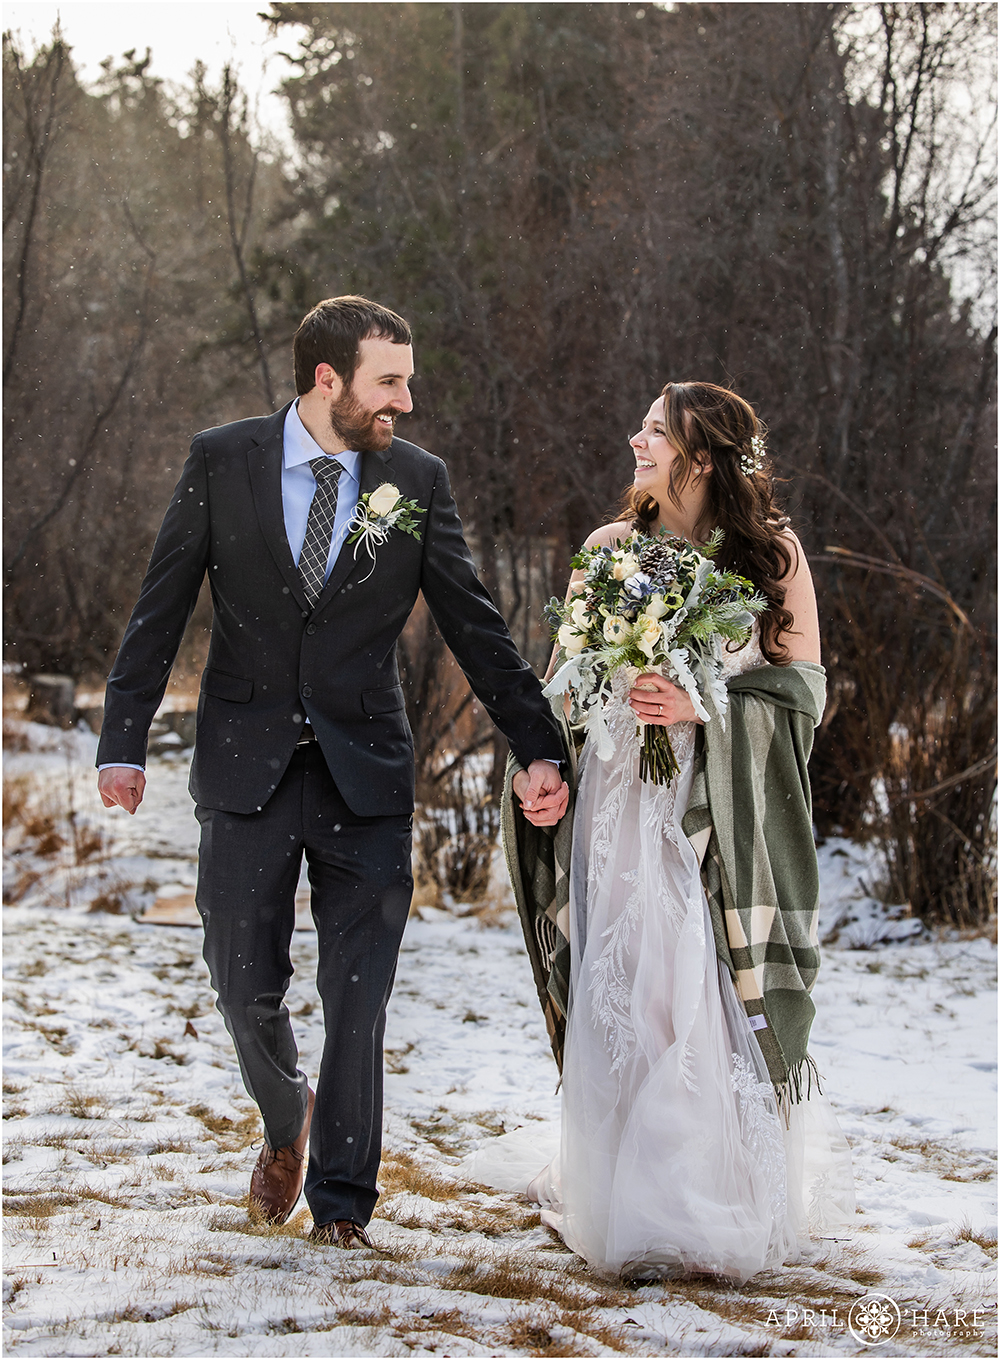 Chilly wedding day portrait of a couple walking through the snow together in Estes Park Colorado